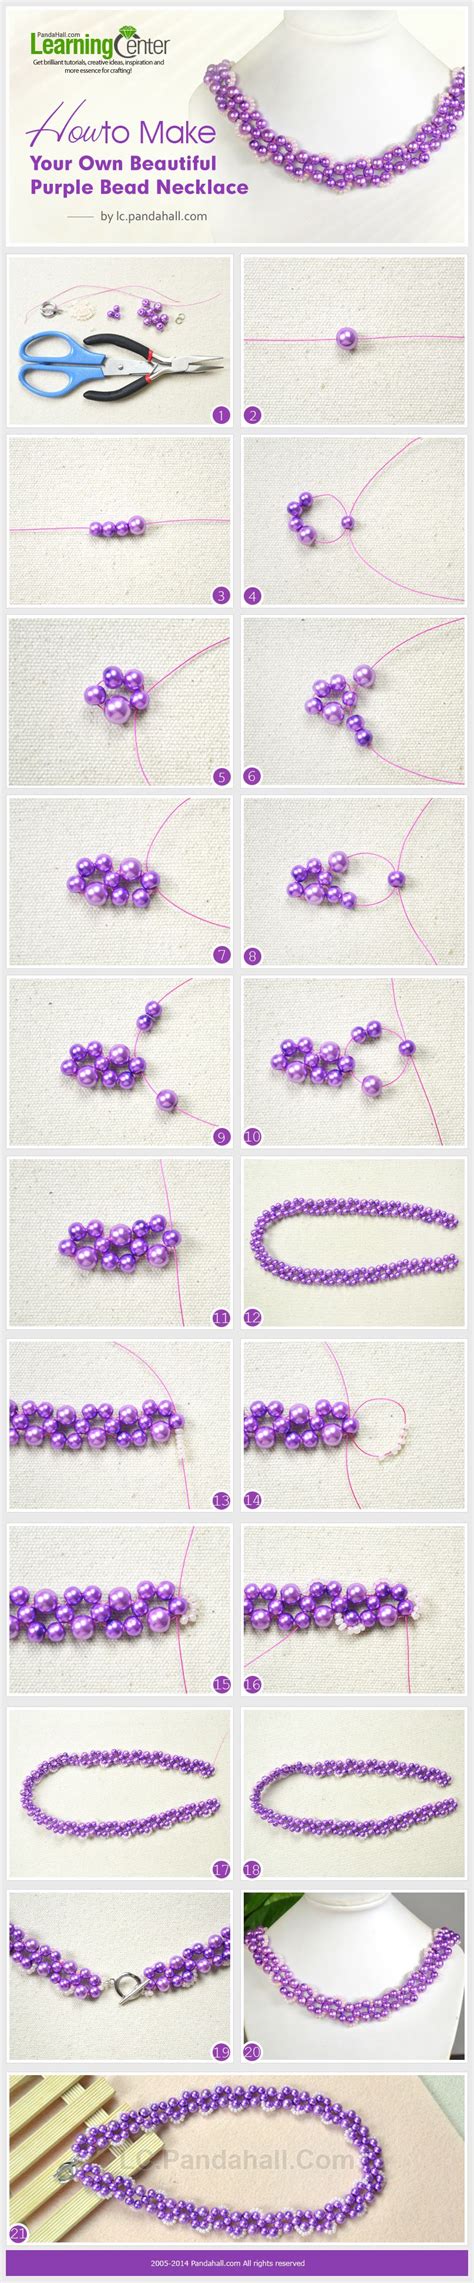 How To Make Your Own Beautiful Purple Bead Necklace Jewelery Making